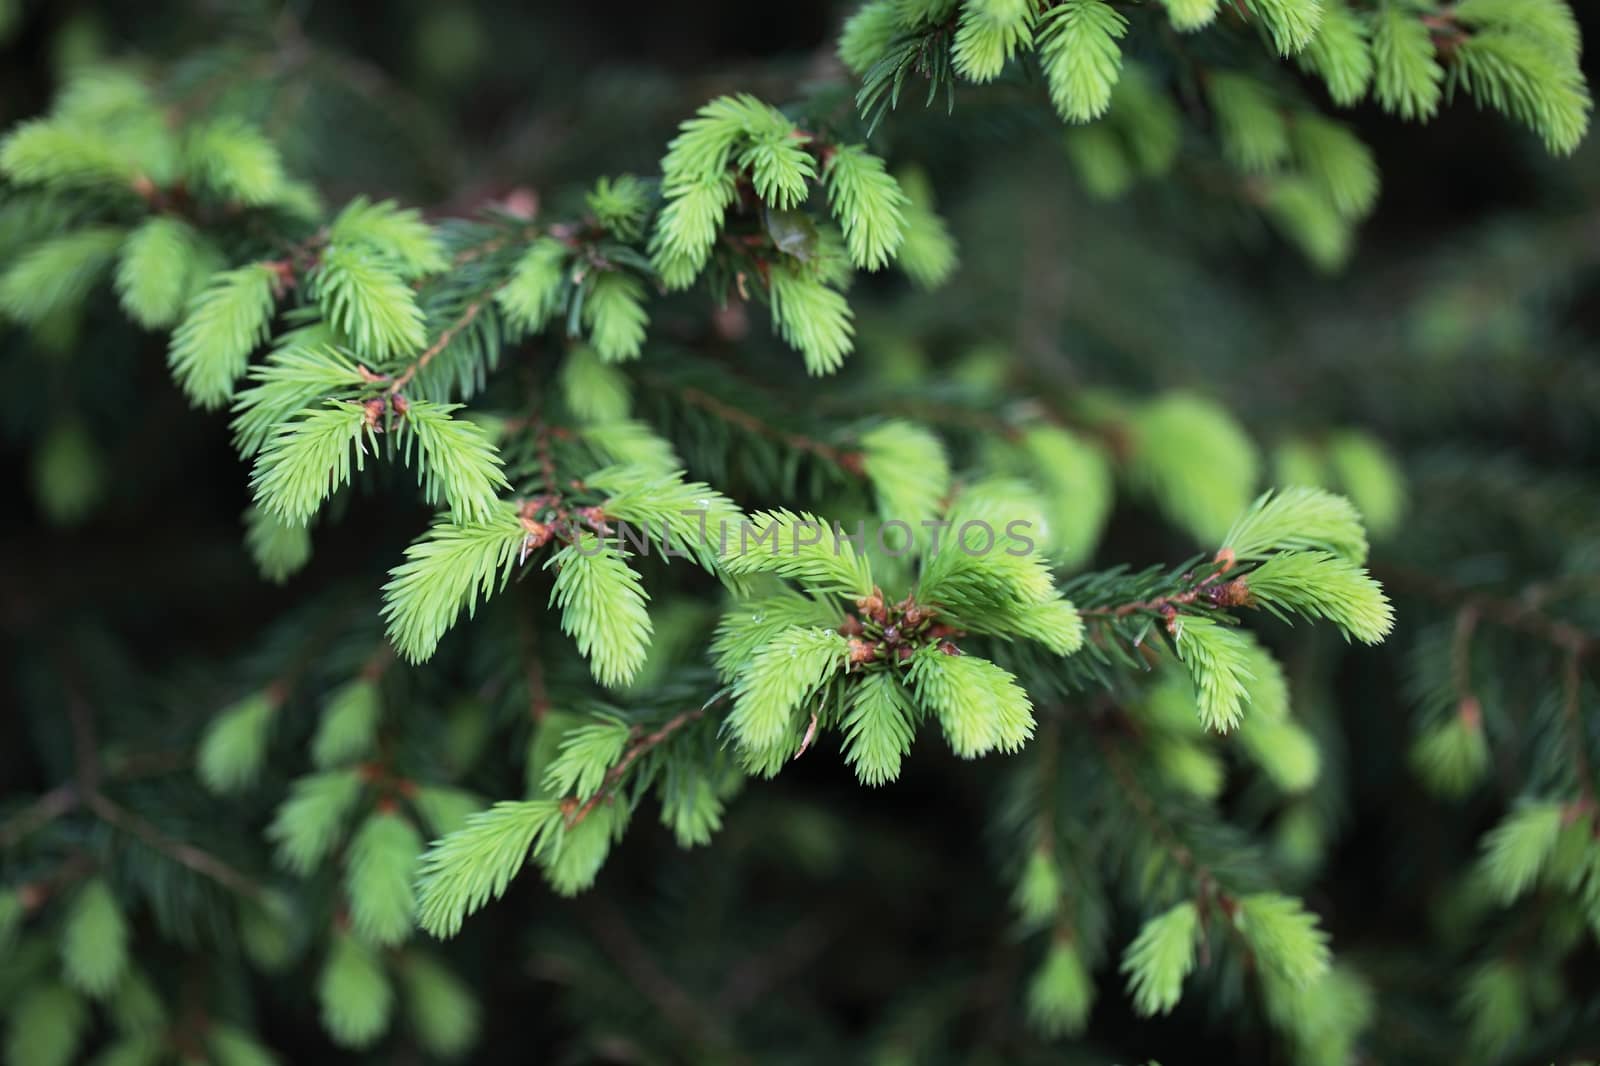 Macro photo of a fresh shoot of young spruce needles.